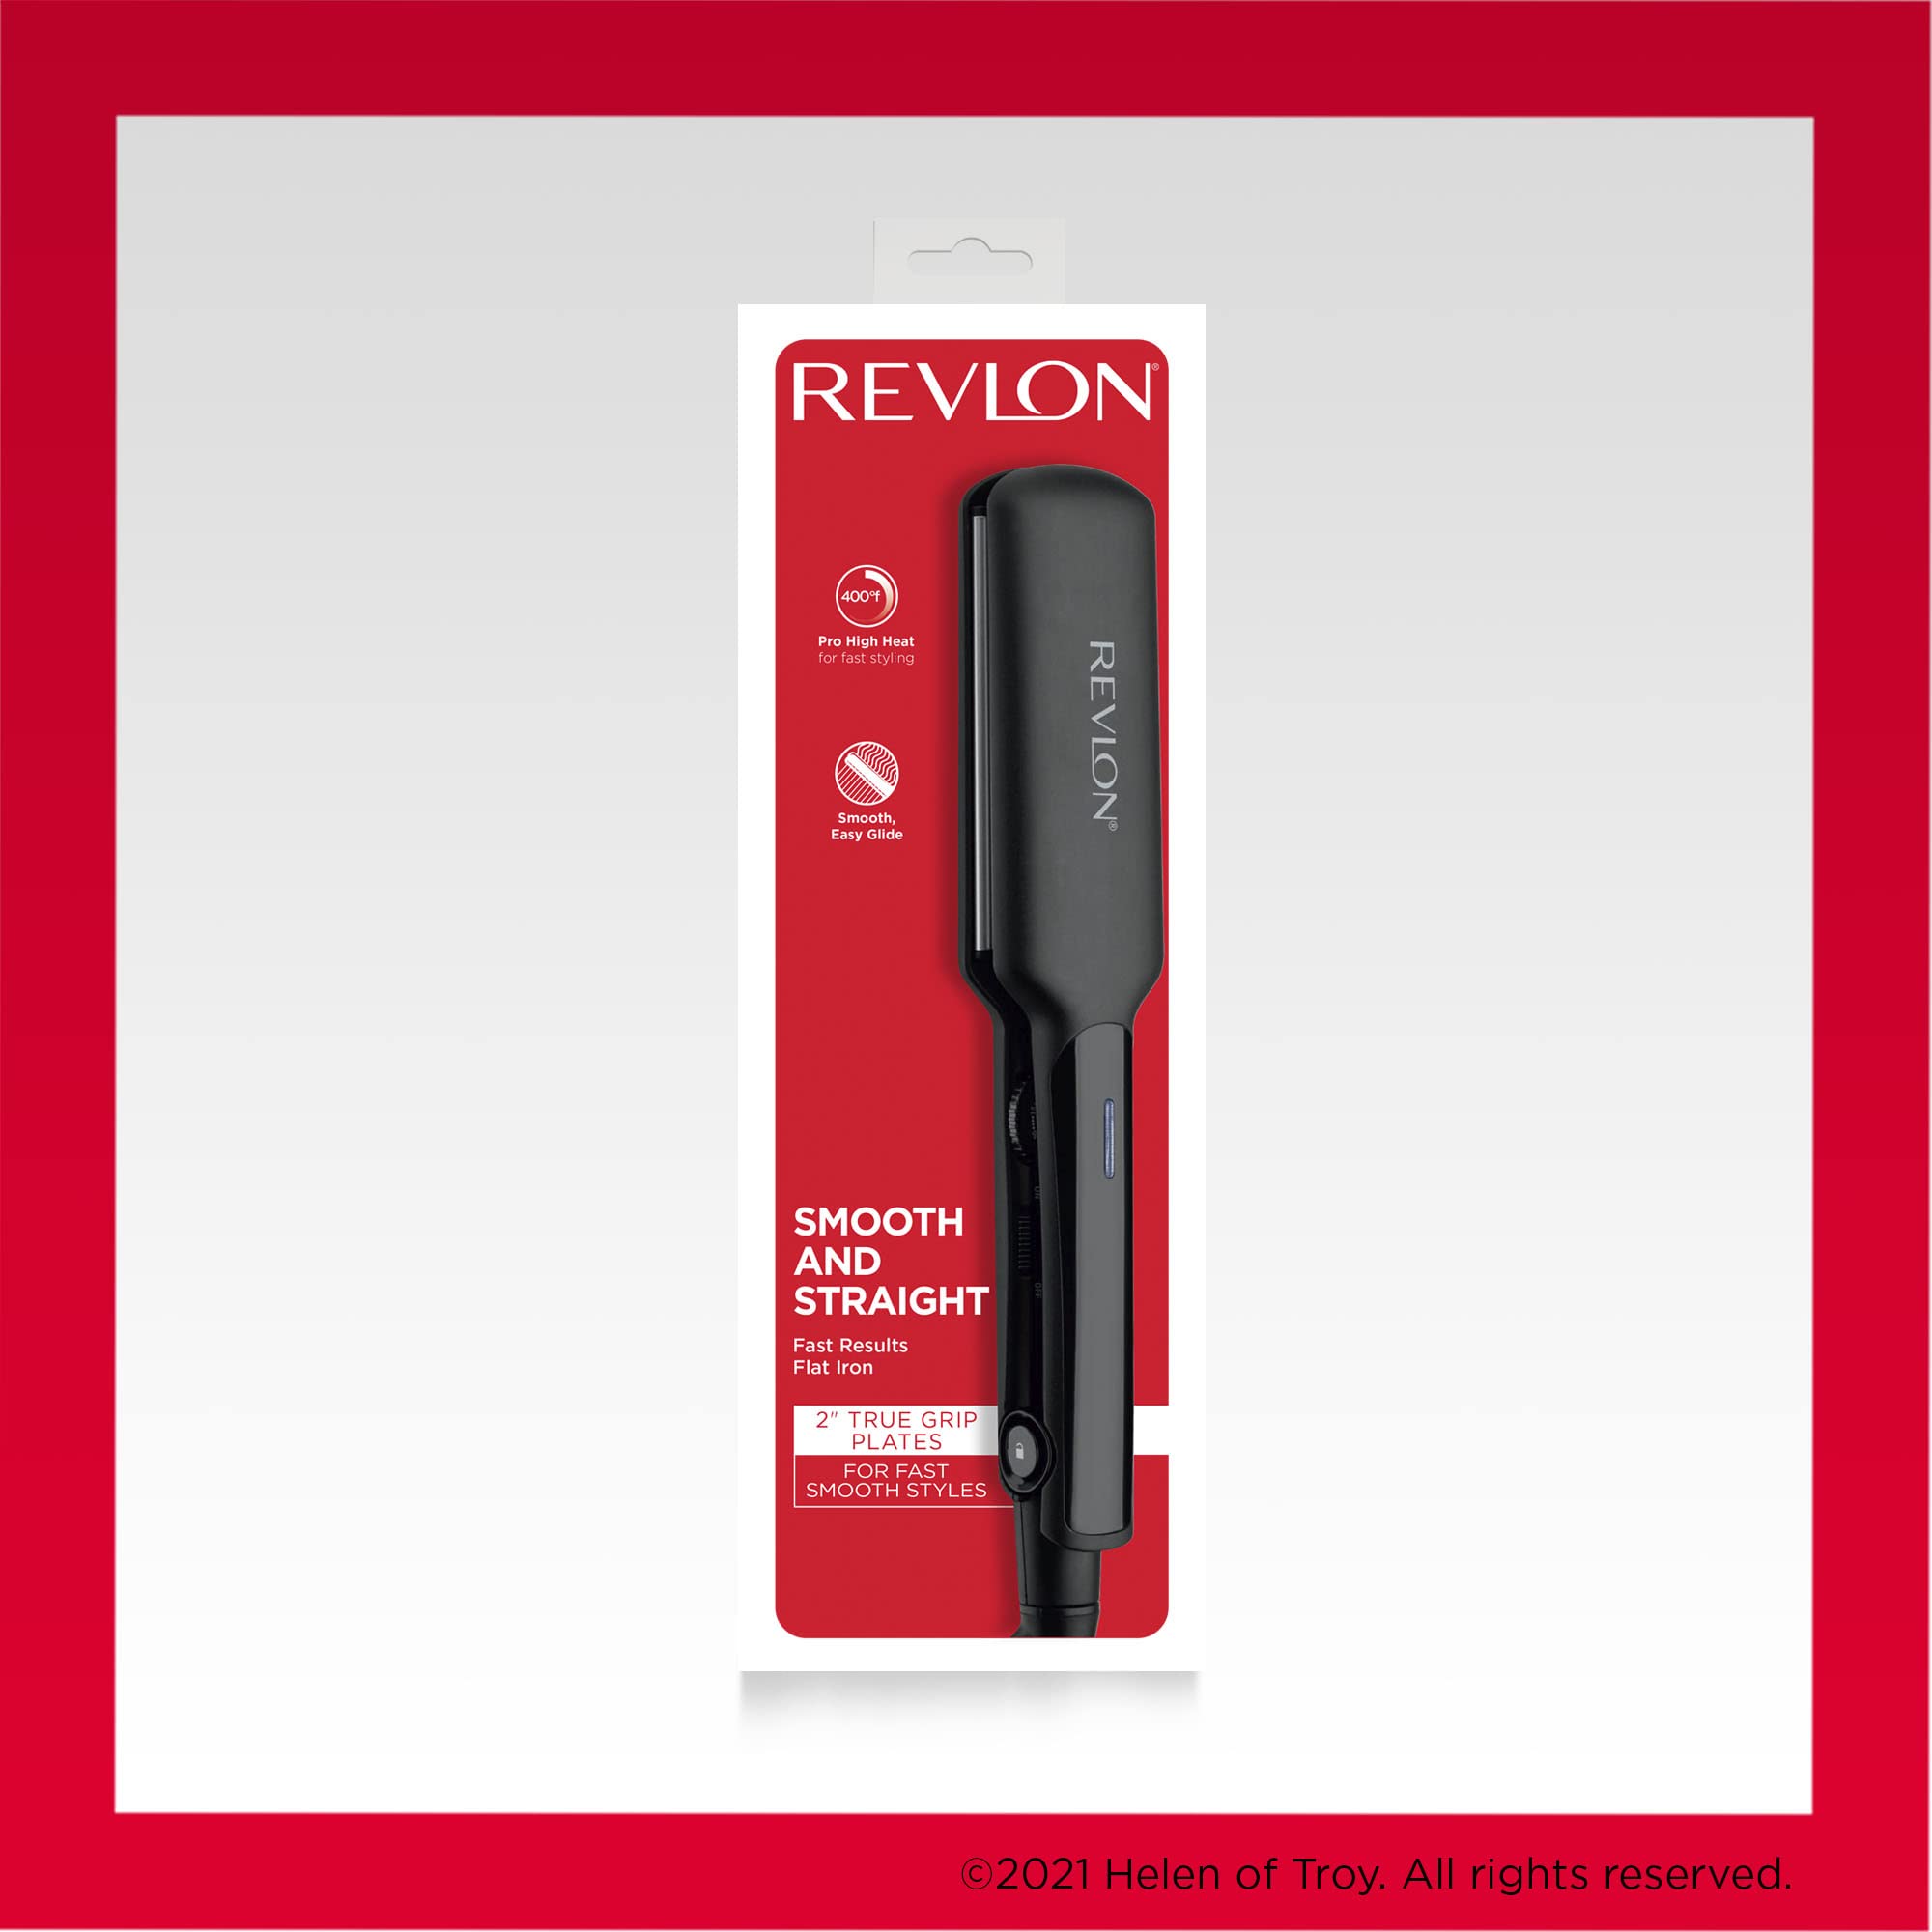 REVLON Smooth and Straight Ceramic Flat Iron | Fast Results, Smooth Styles (2 in)